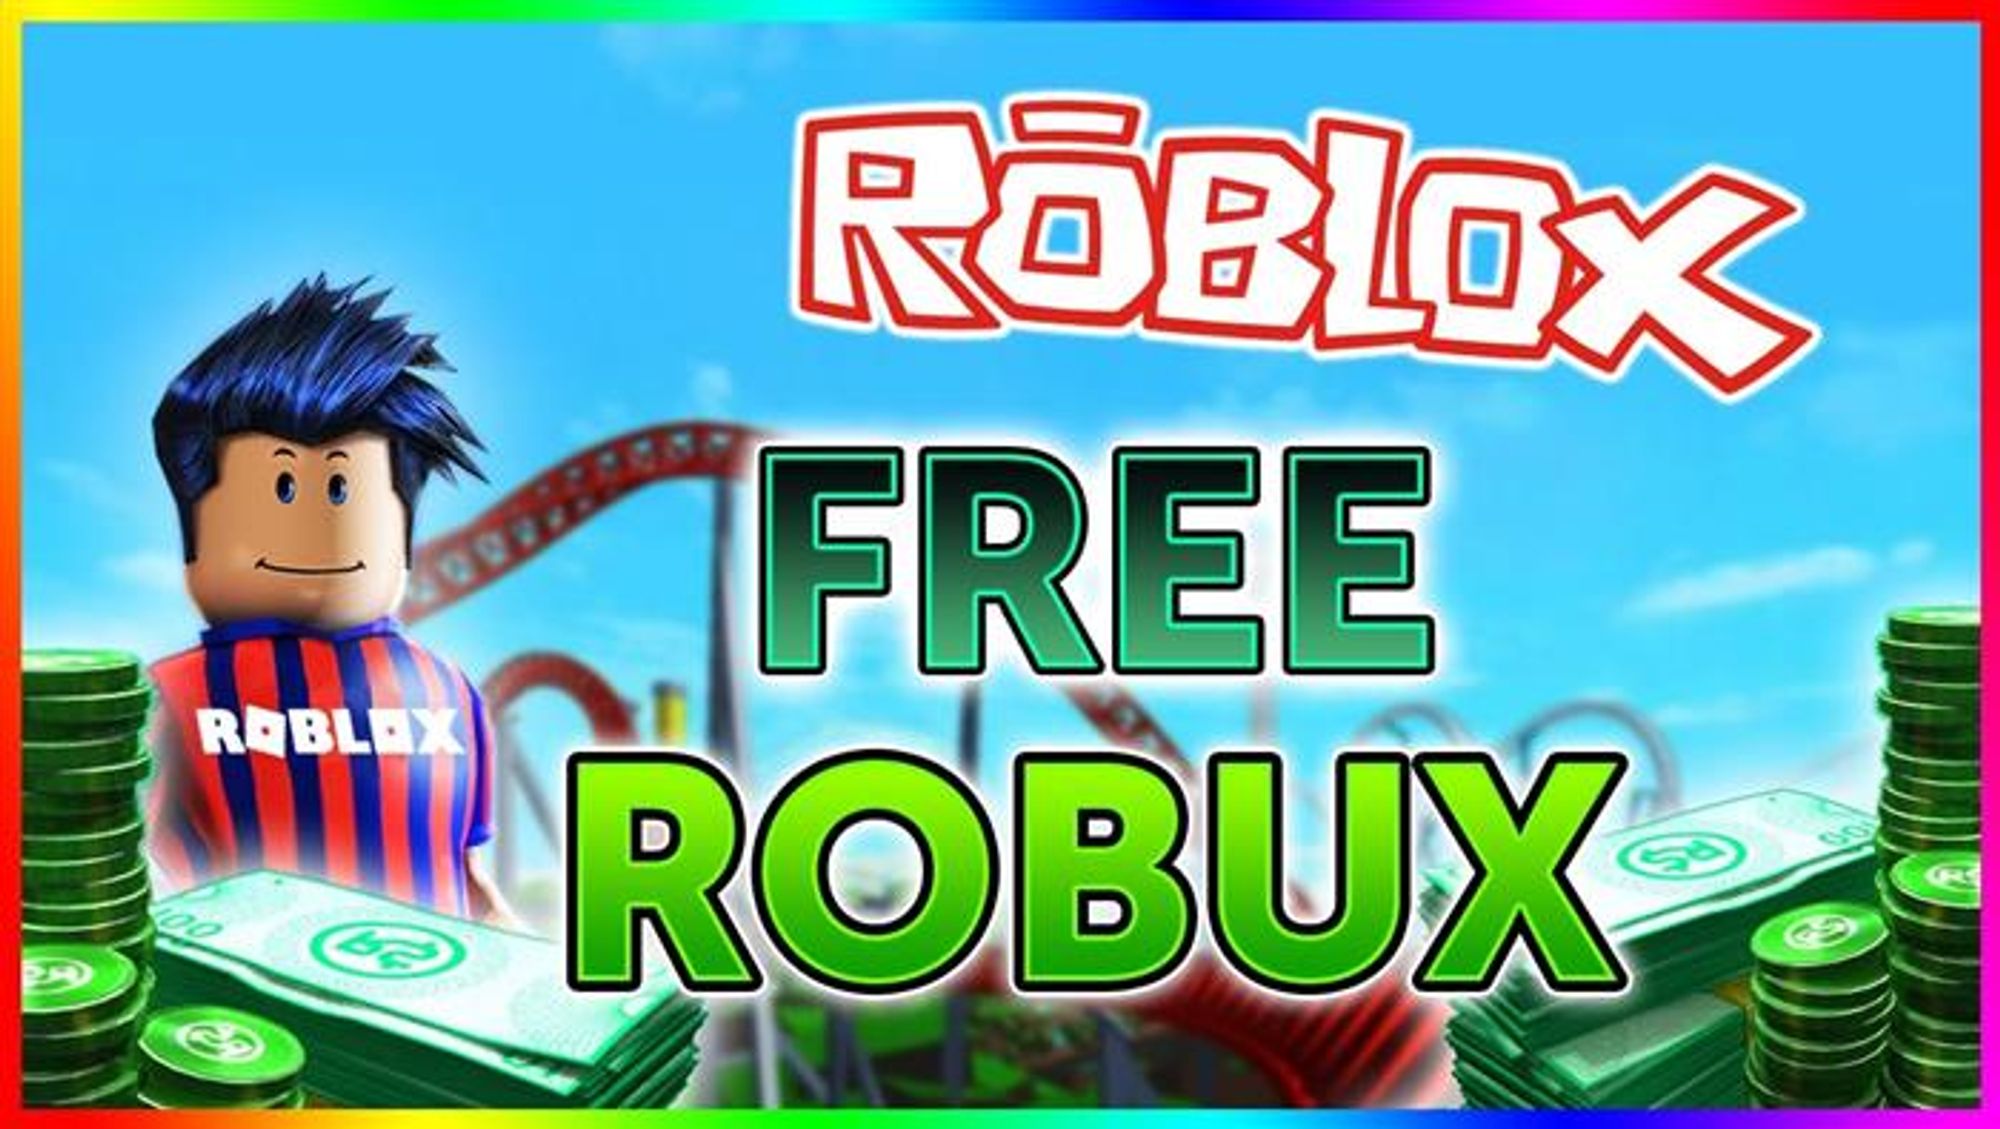 Free Robux No Survey - robux for free hack no offers